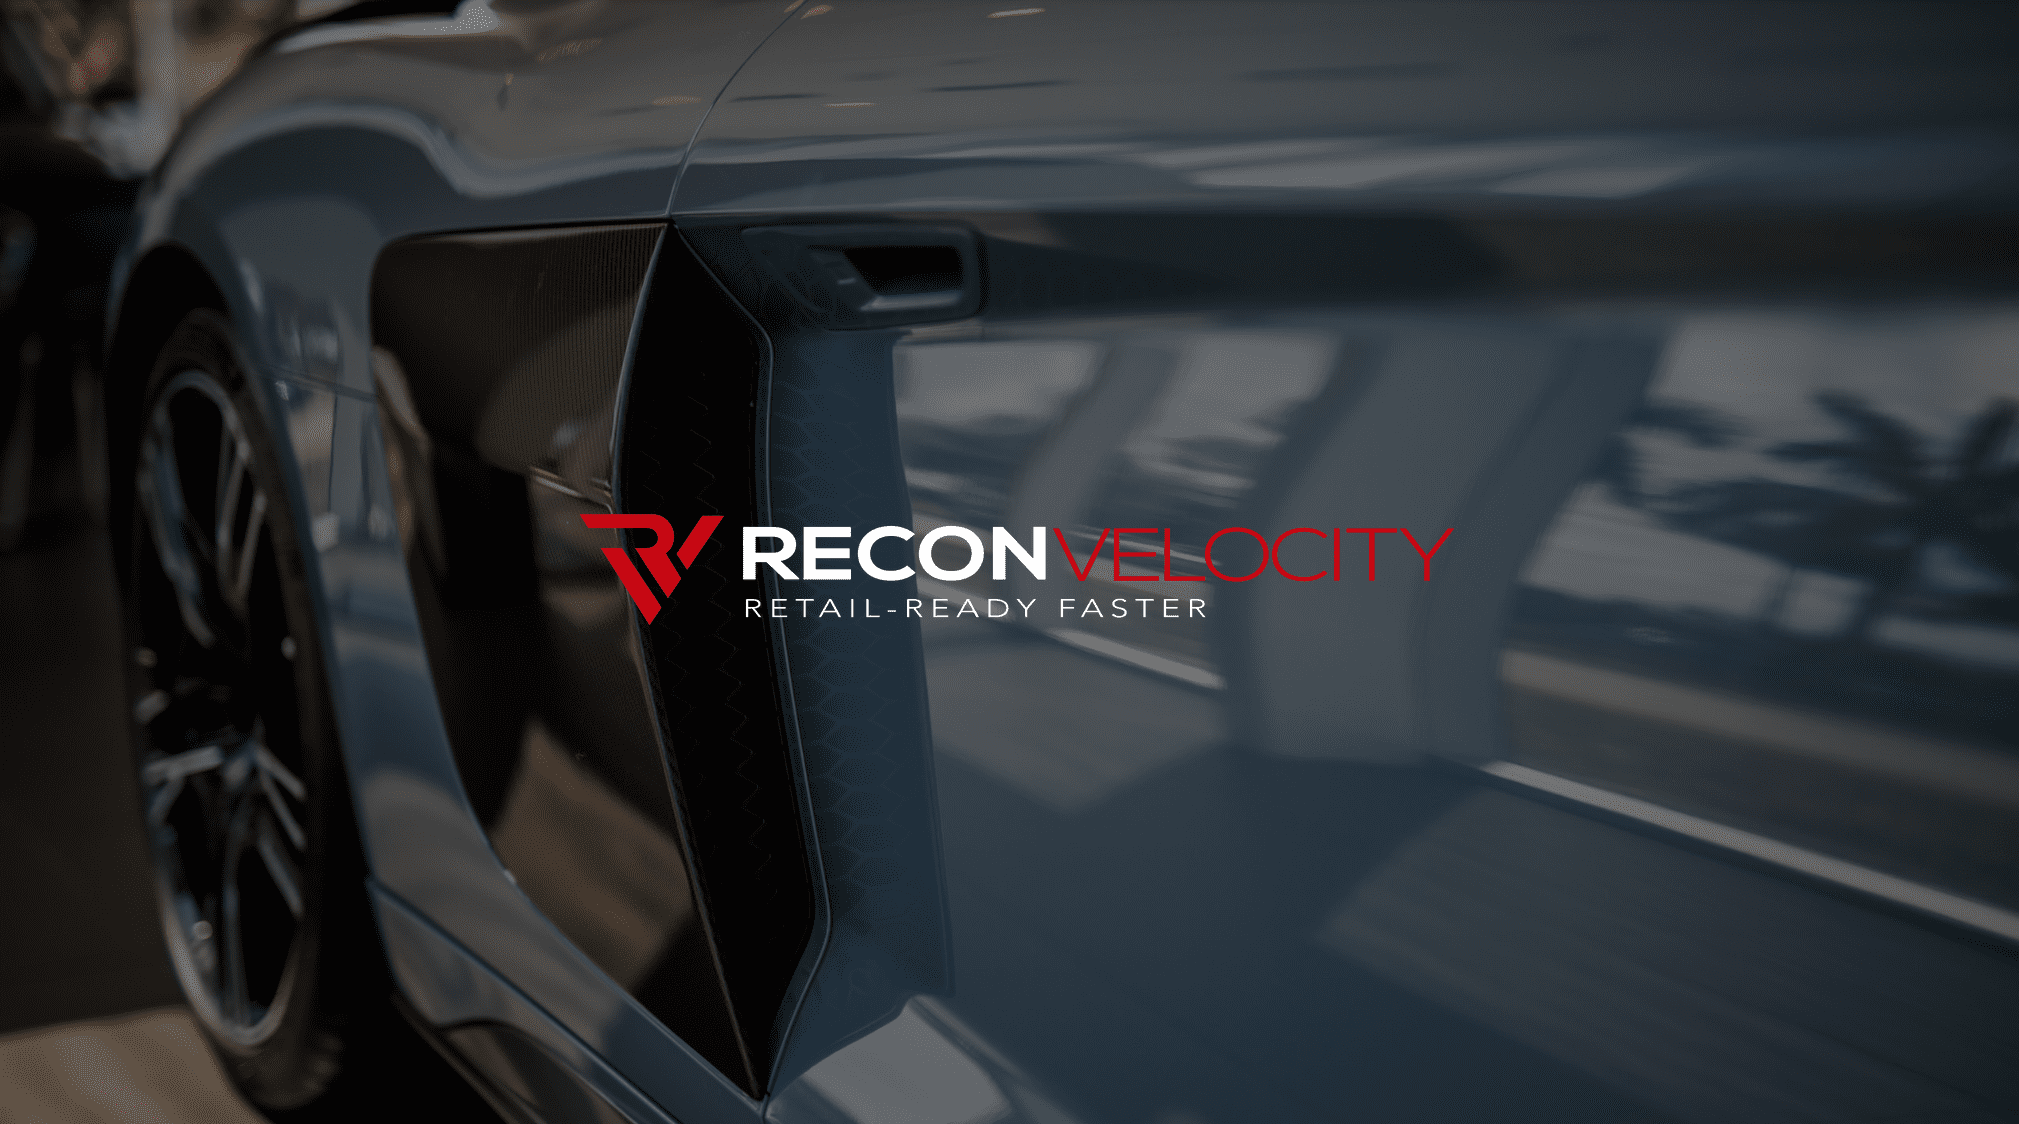 IU C&I Studios Page White and red Recon Velocity logo with a side view of a luxury car in the background